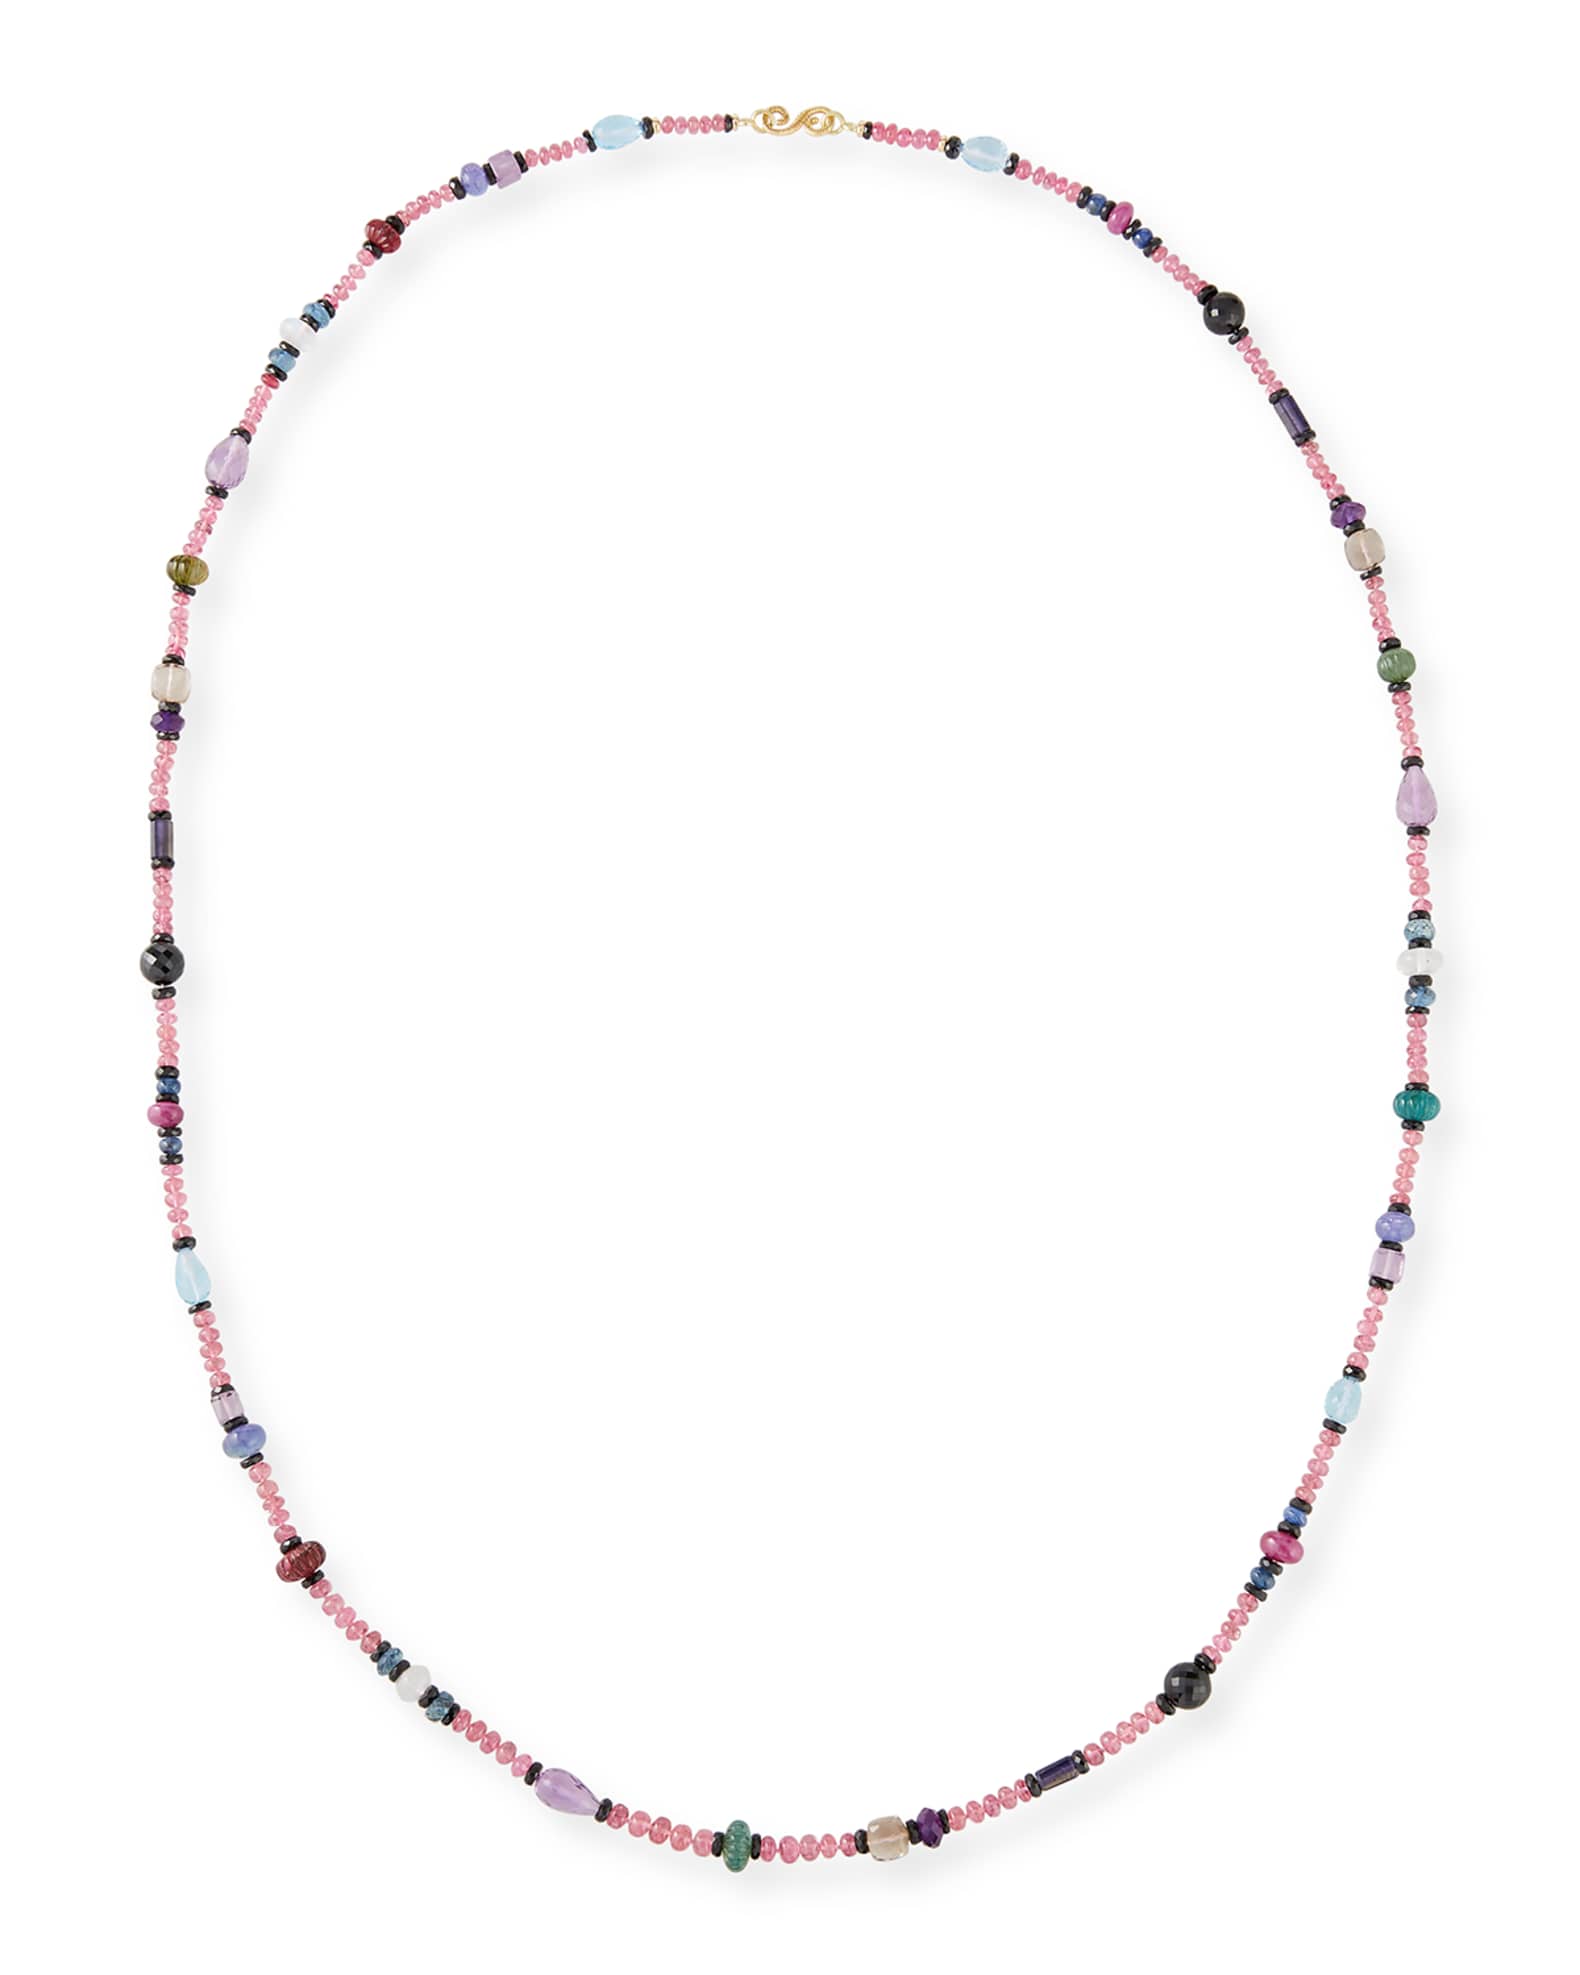 Splendid Company Long Pink Spinel Mixed-Stone Necklace, 36